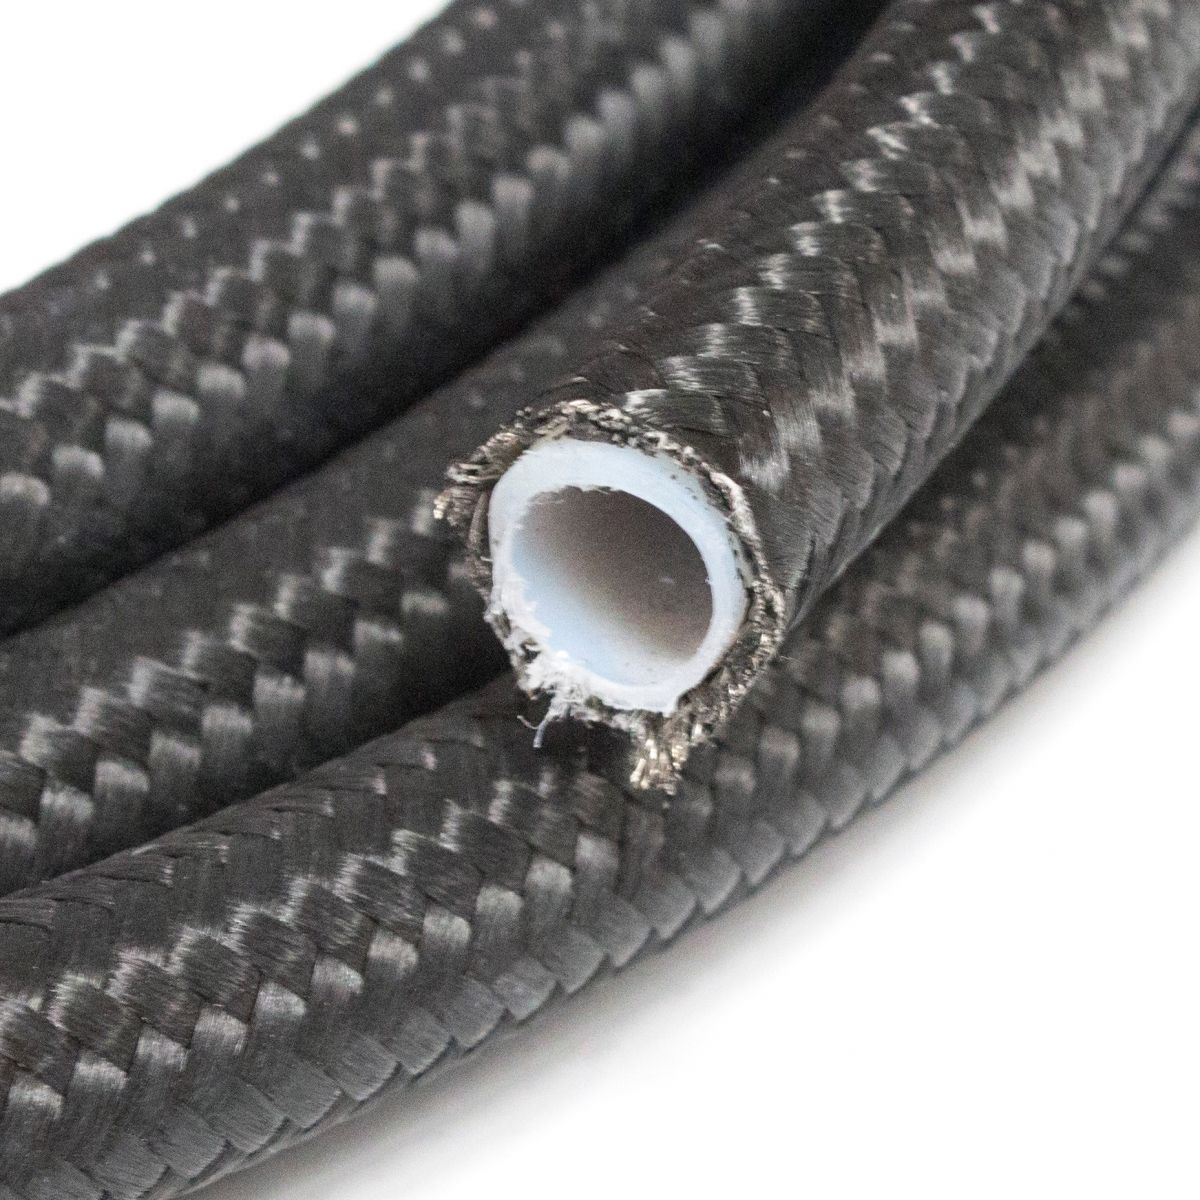 Stainless Steel Overbraided Rubber Fuel Hose 10mm (3/8) 10 Metres Silver -  Auto Silicone Hoses